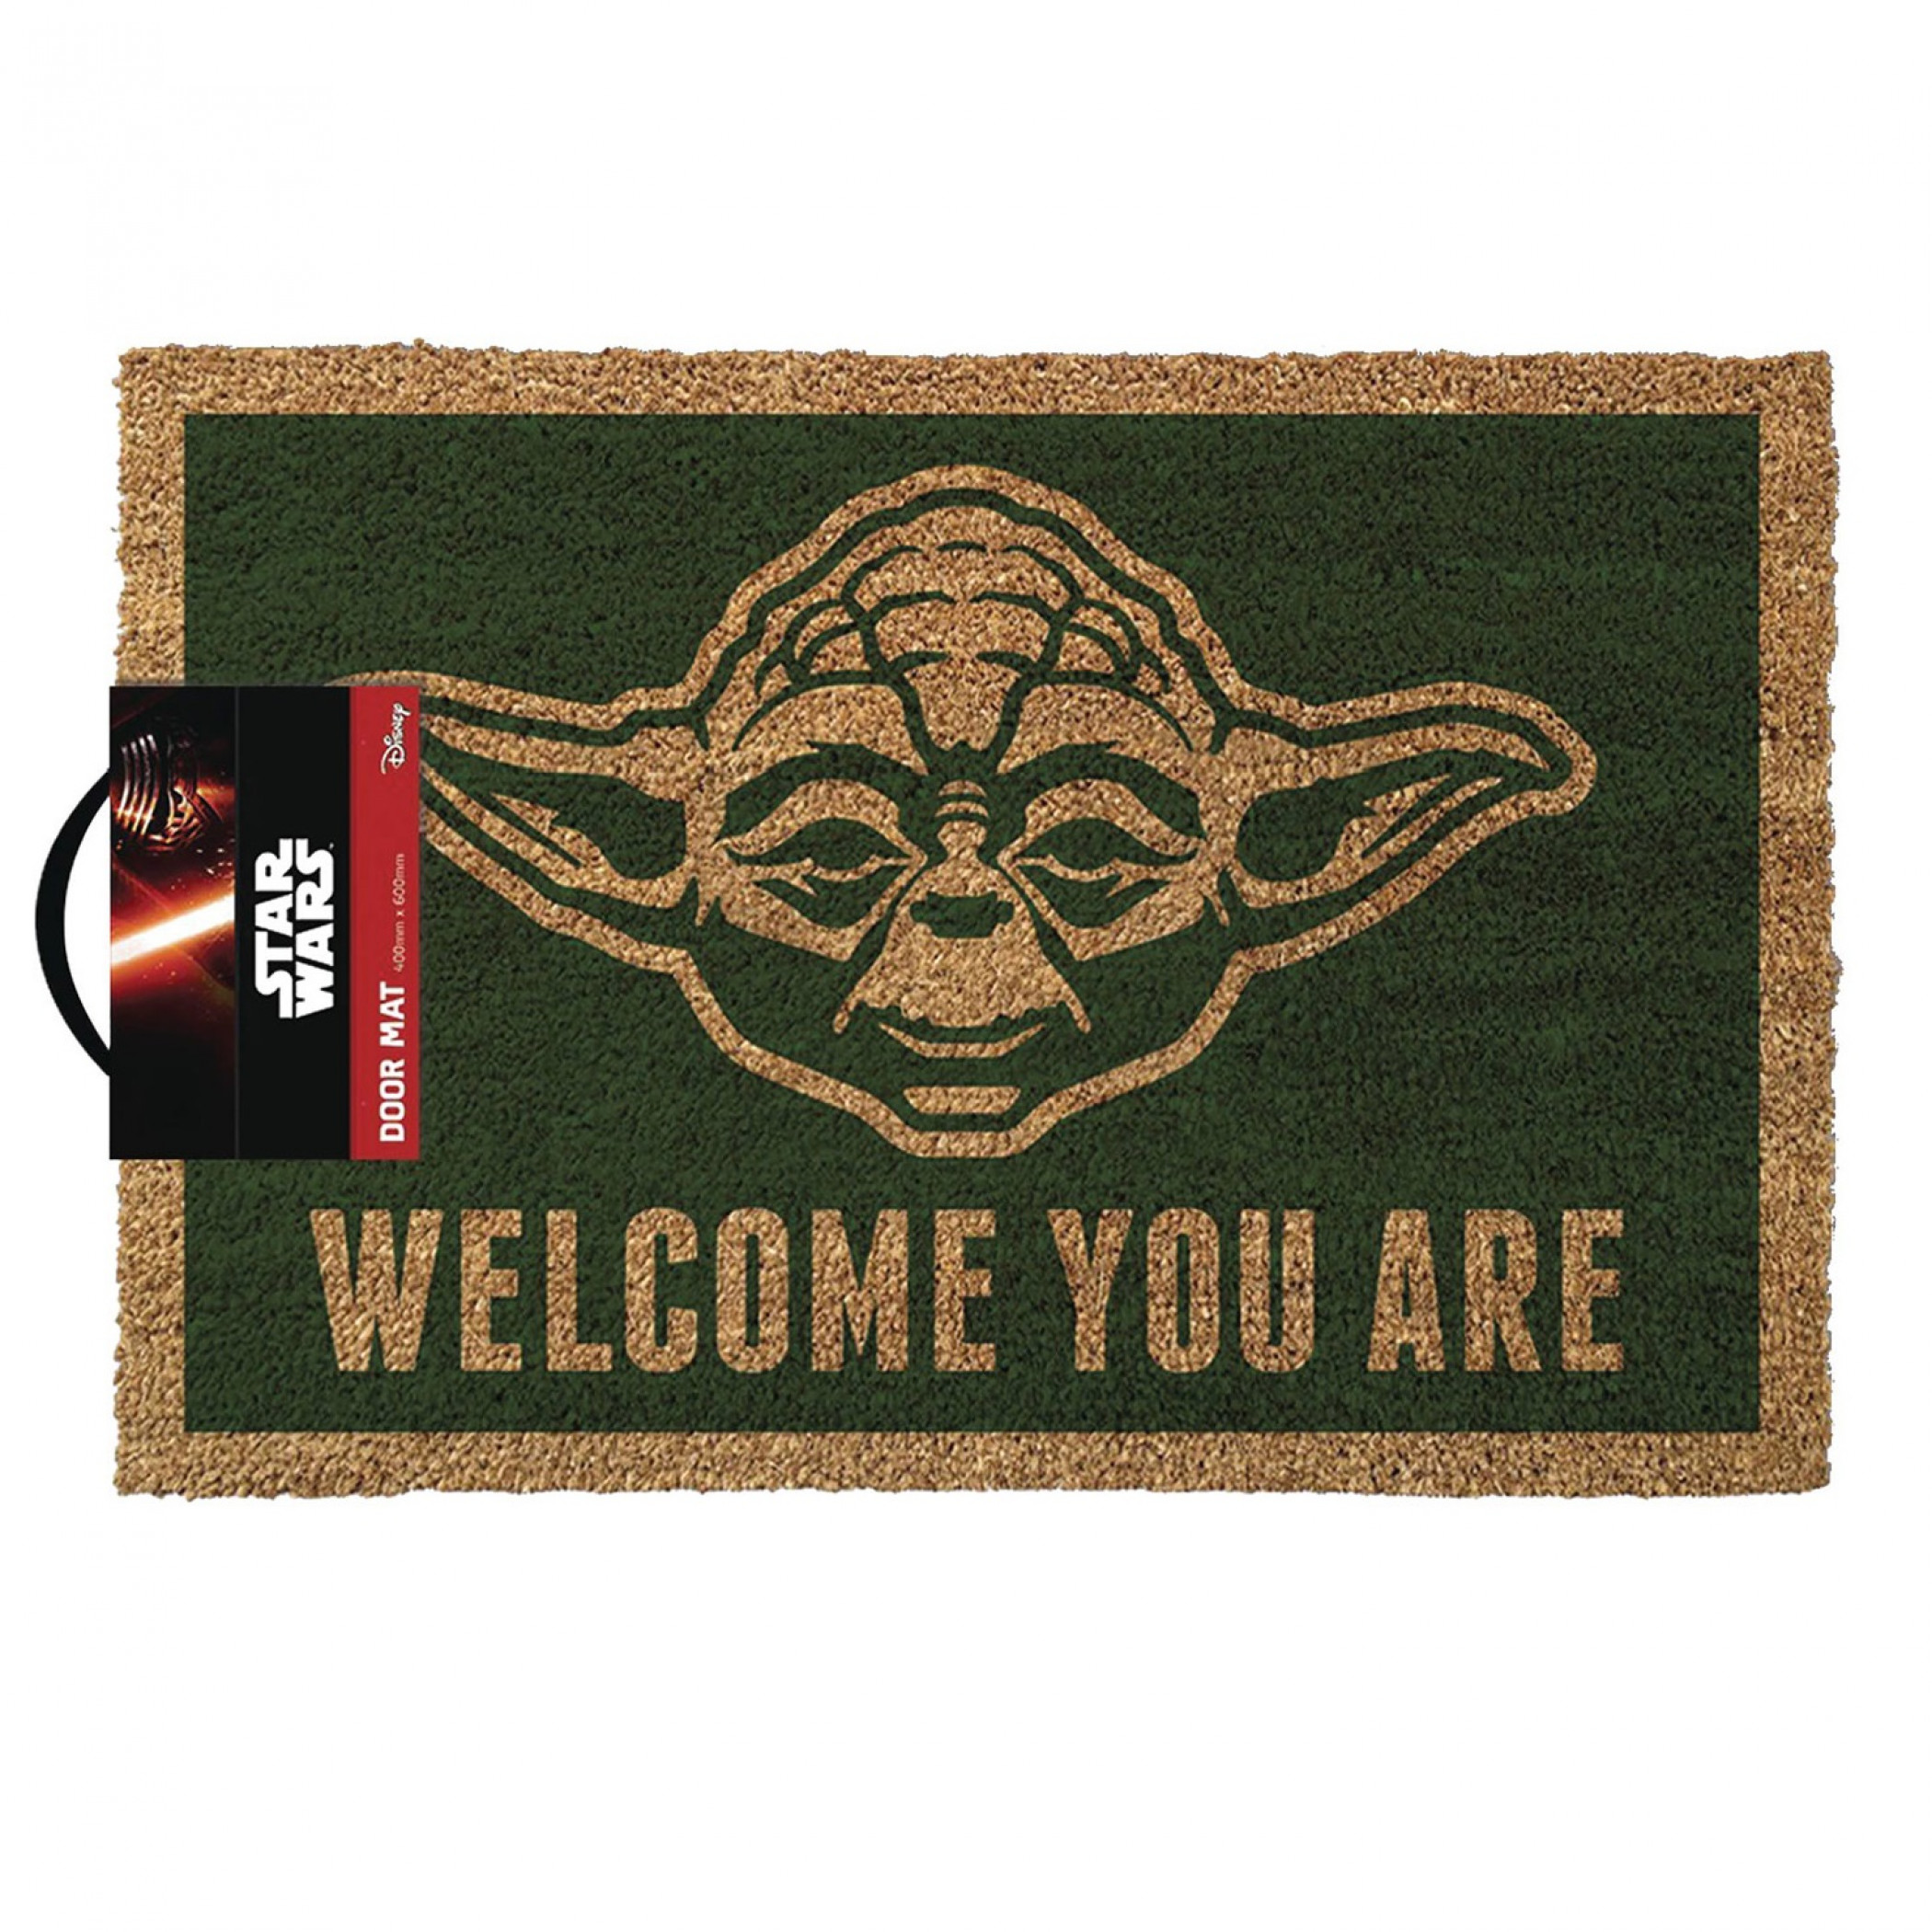 Star Wars Yoda Welcome You Are 17"x 29" Doormat with Non-skid Back